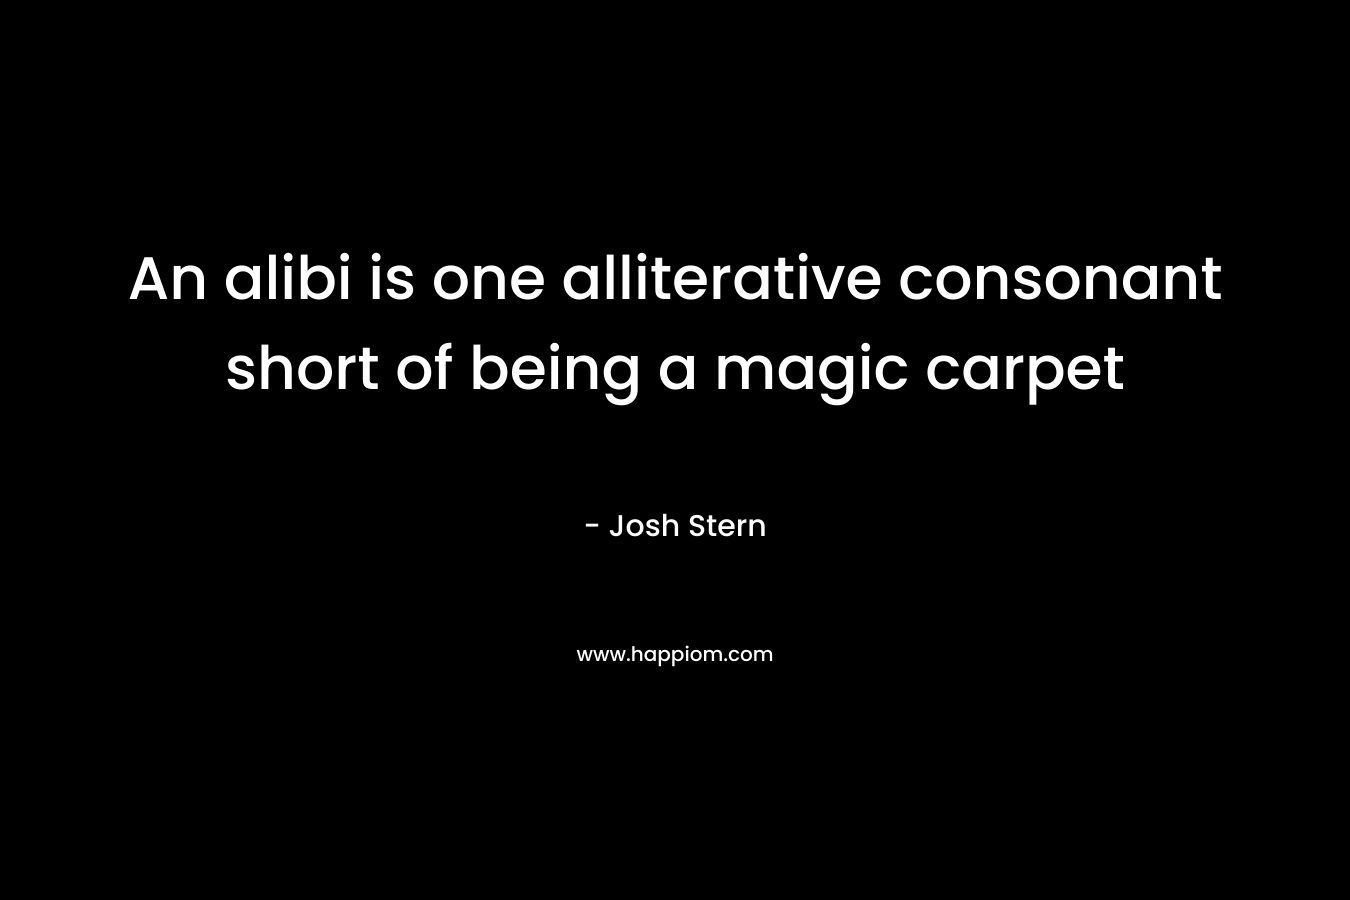 An alibi is one alliterative consonant short of being a magic carpet